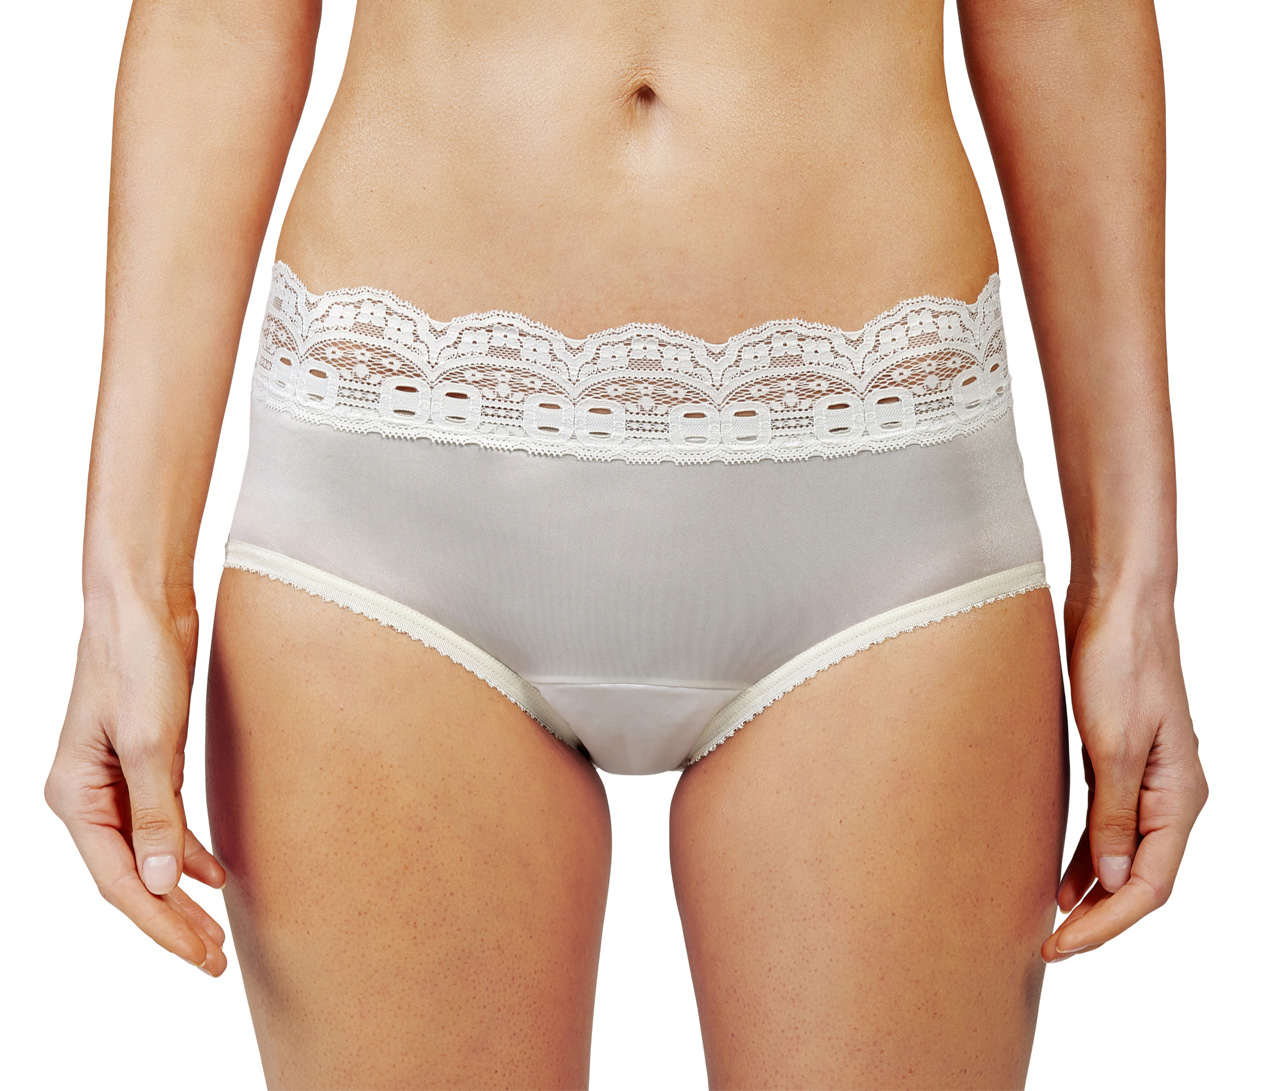 Velrose Lingerie Shadowline Nylon Full Brief Panty with Lace, 3-Pack